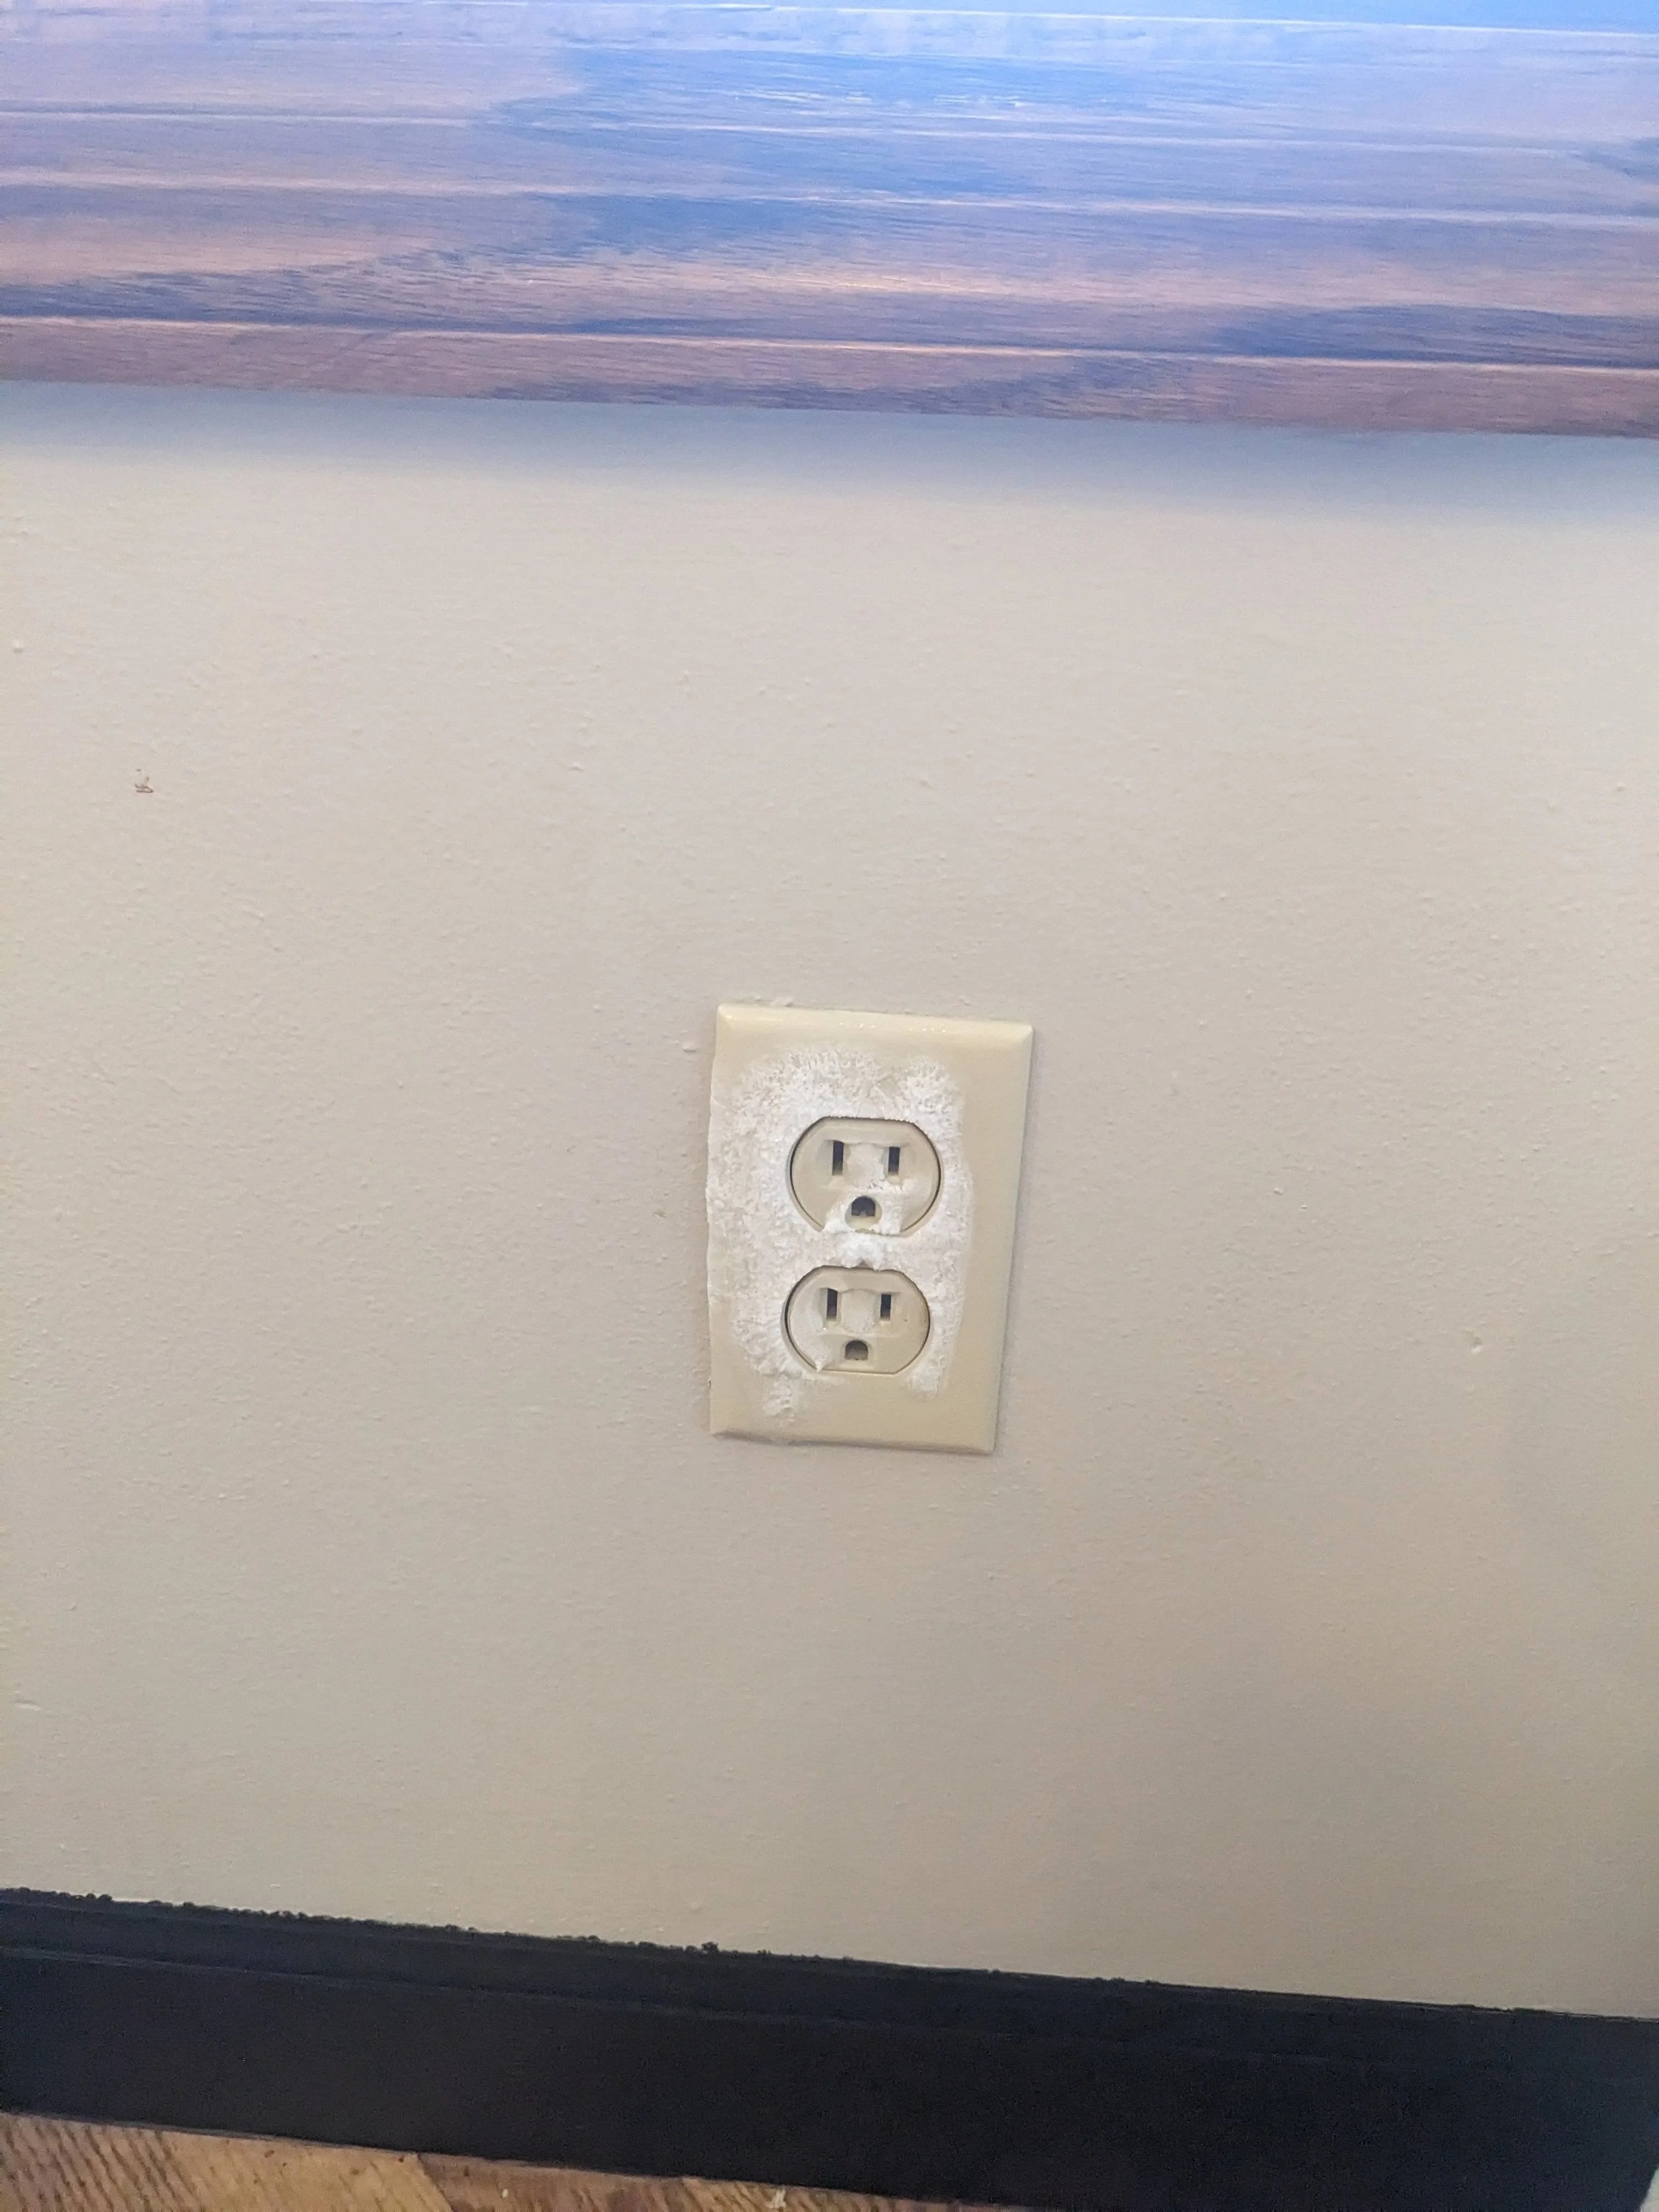 An electric outlet with frost on it